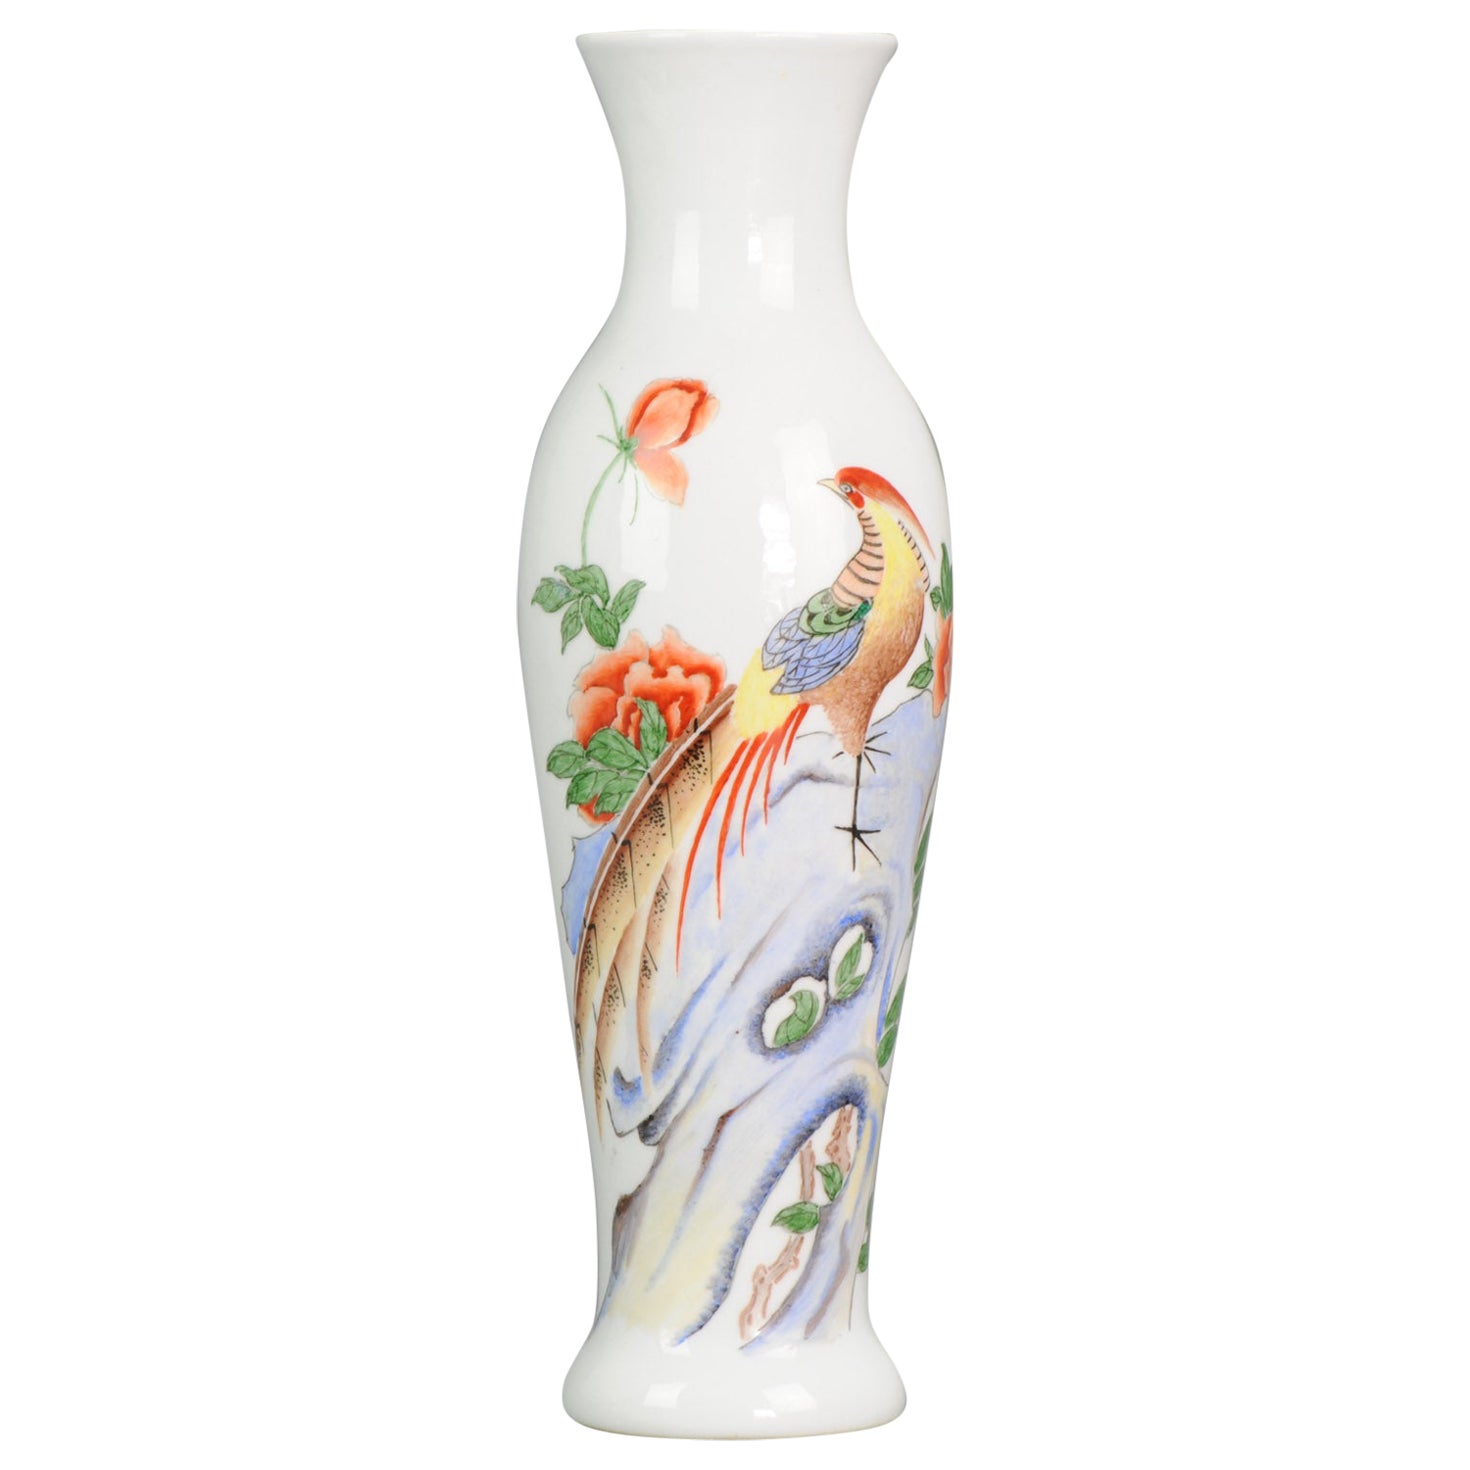 Lovely Proc Chinese Porcelain Vase with Bird and Calligraphy, 20th Century